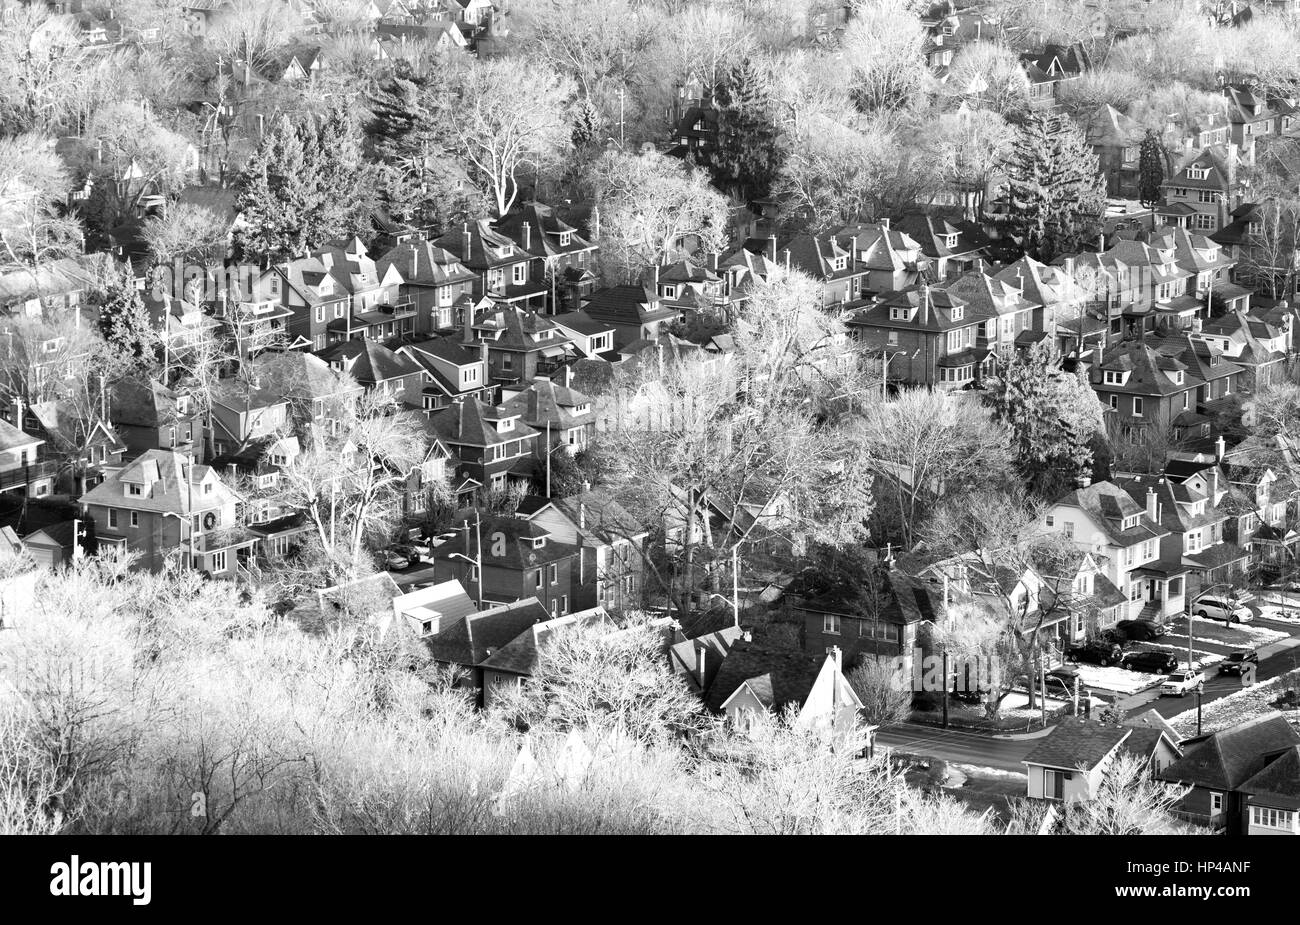 Residential community neighbourhood nestled among winter trees, seen from above in black and white Stock Photo